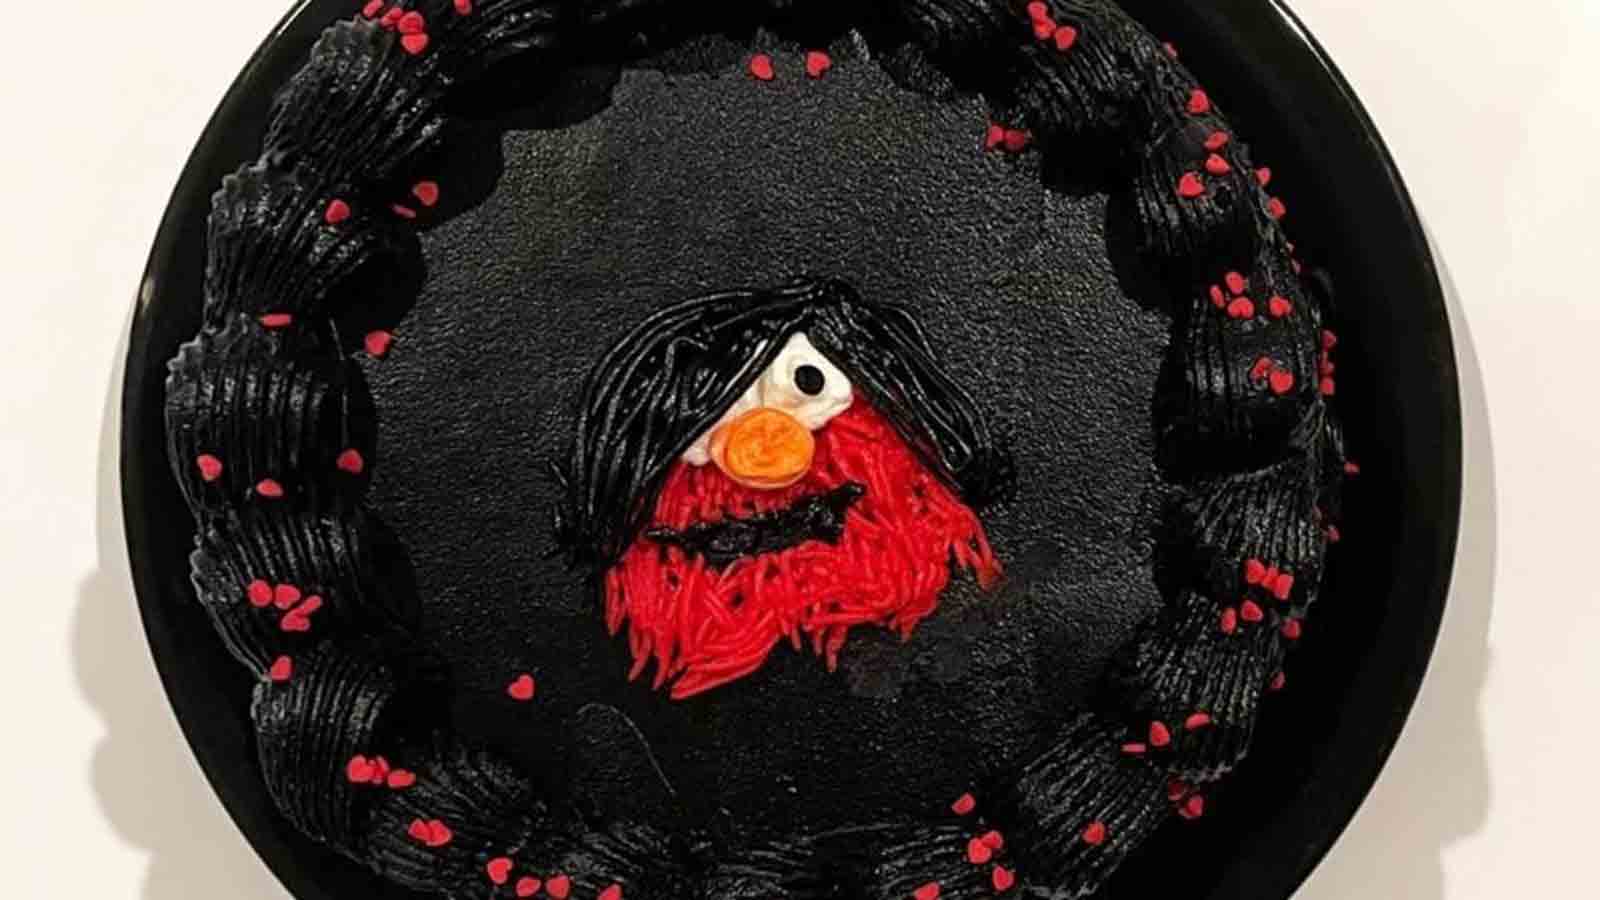 A Baker Misread a Request for an Elmo Cake. The Hilarious Result Went
Viral